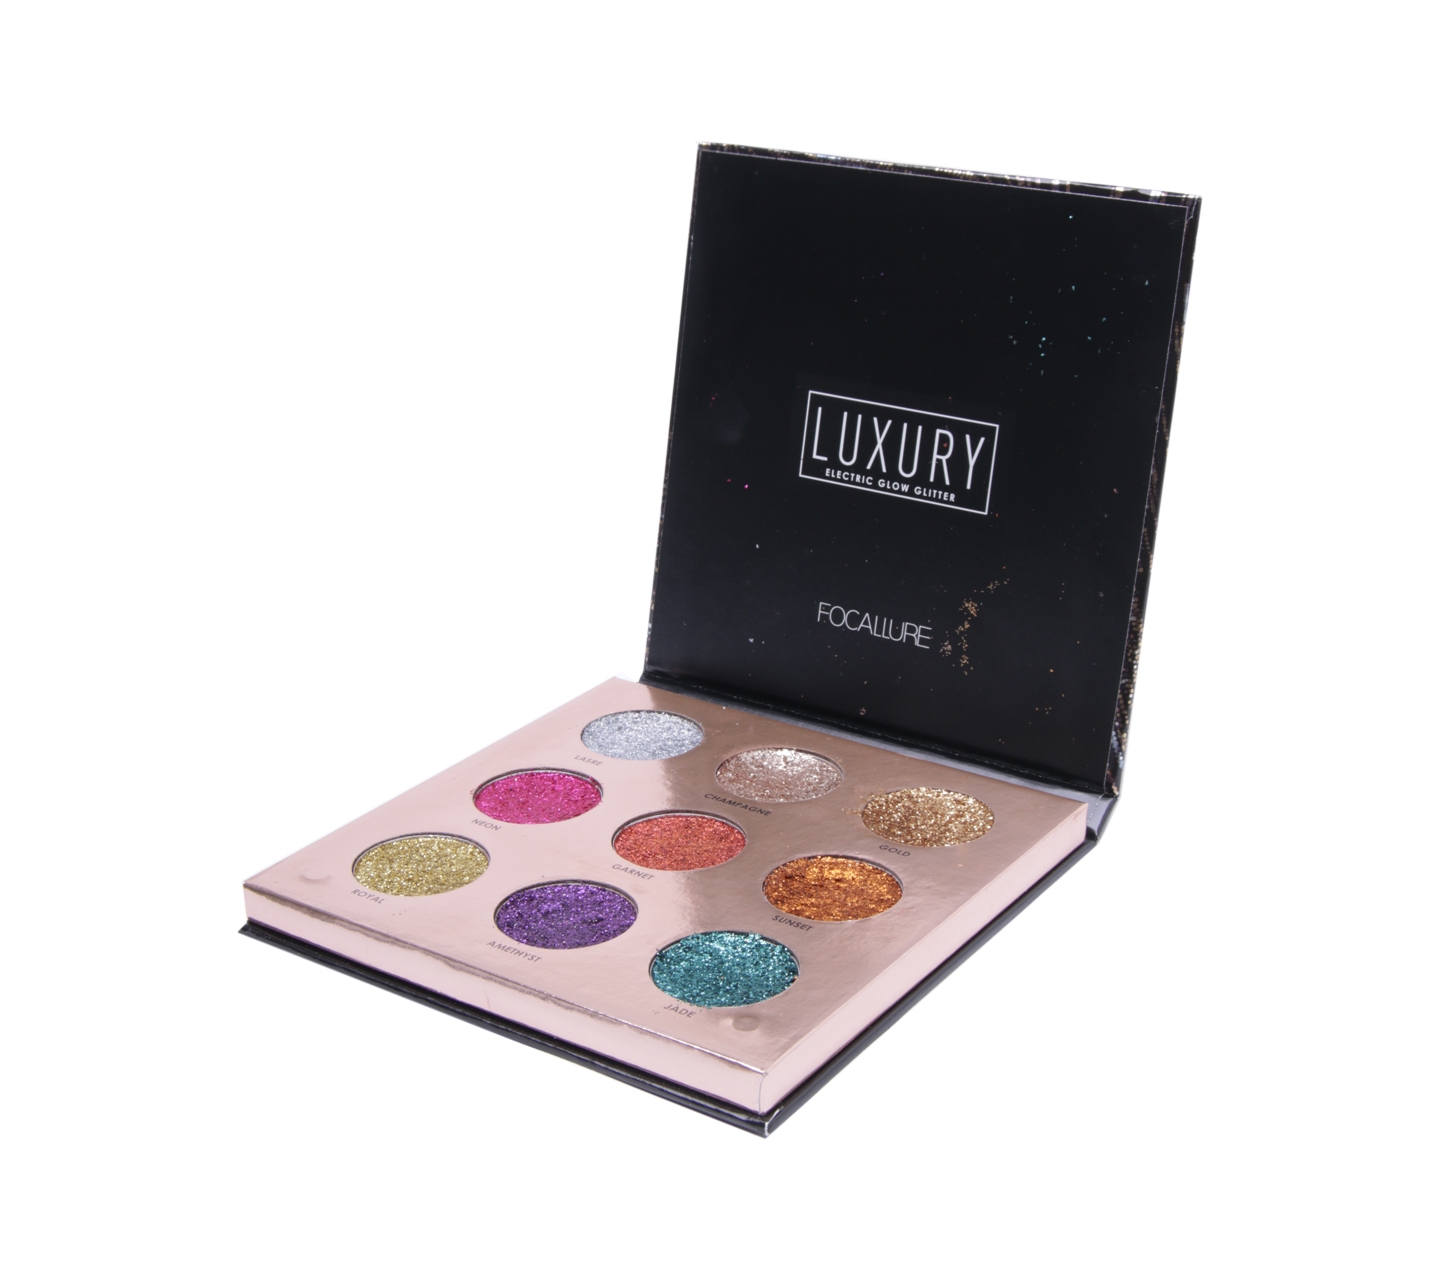 Focallure Luxury Electric Glow Glitter Sets and Palette